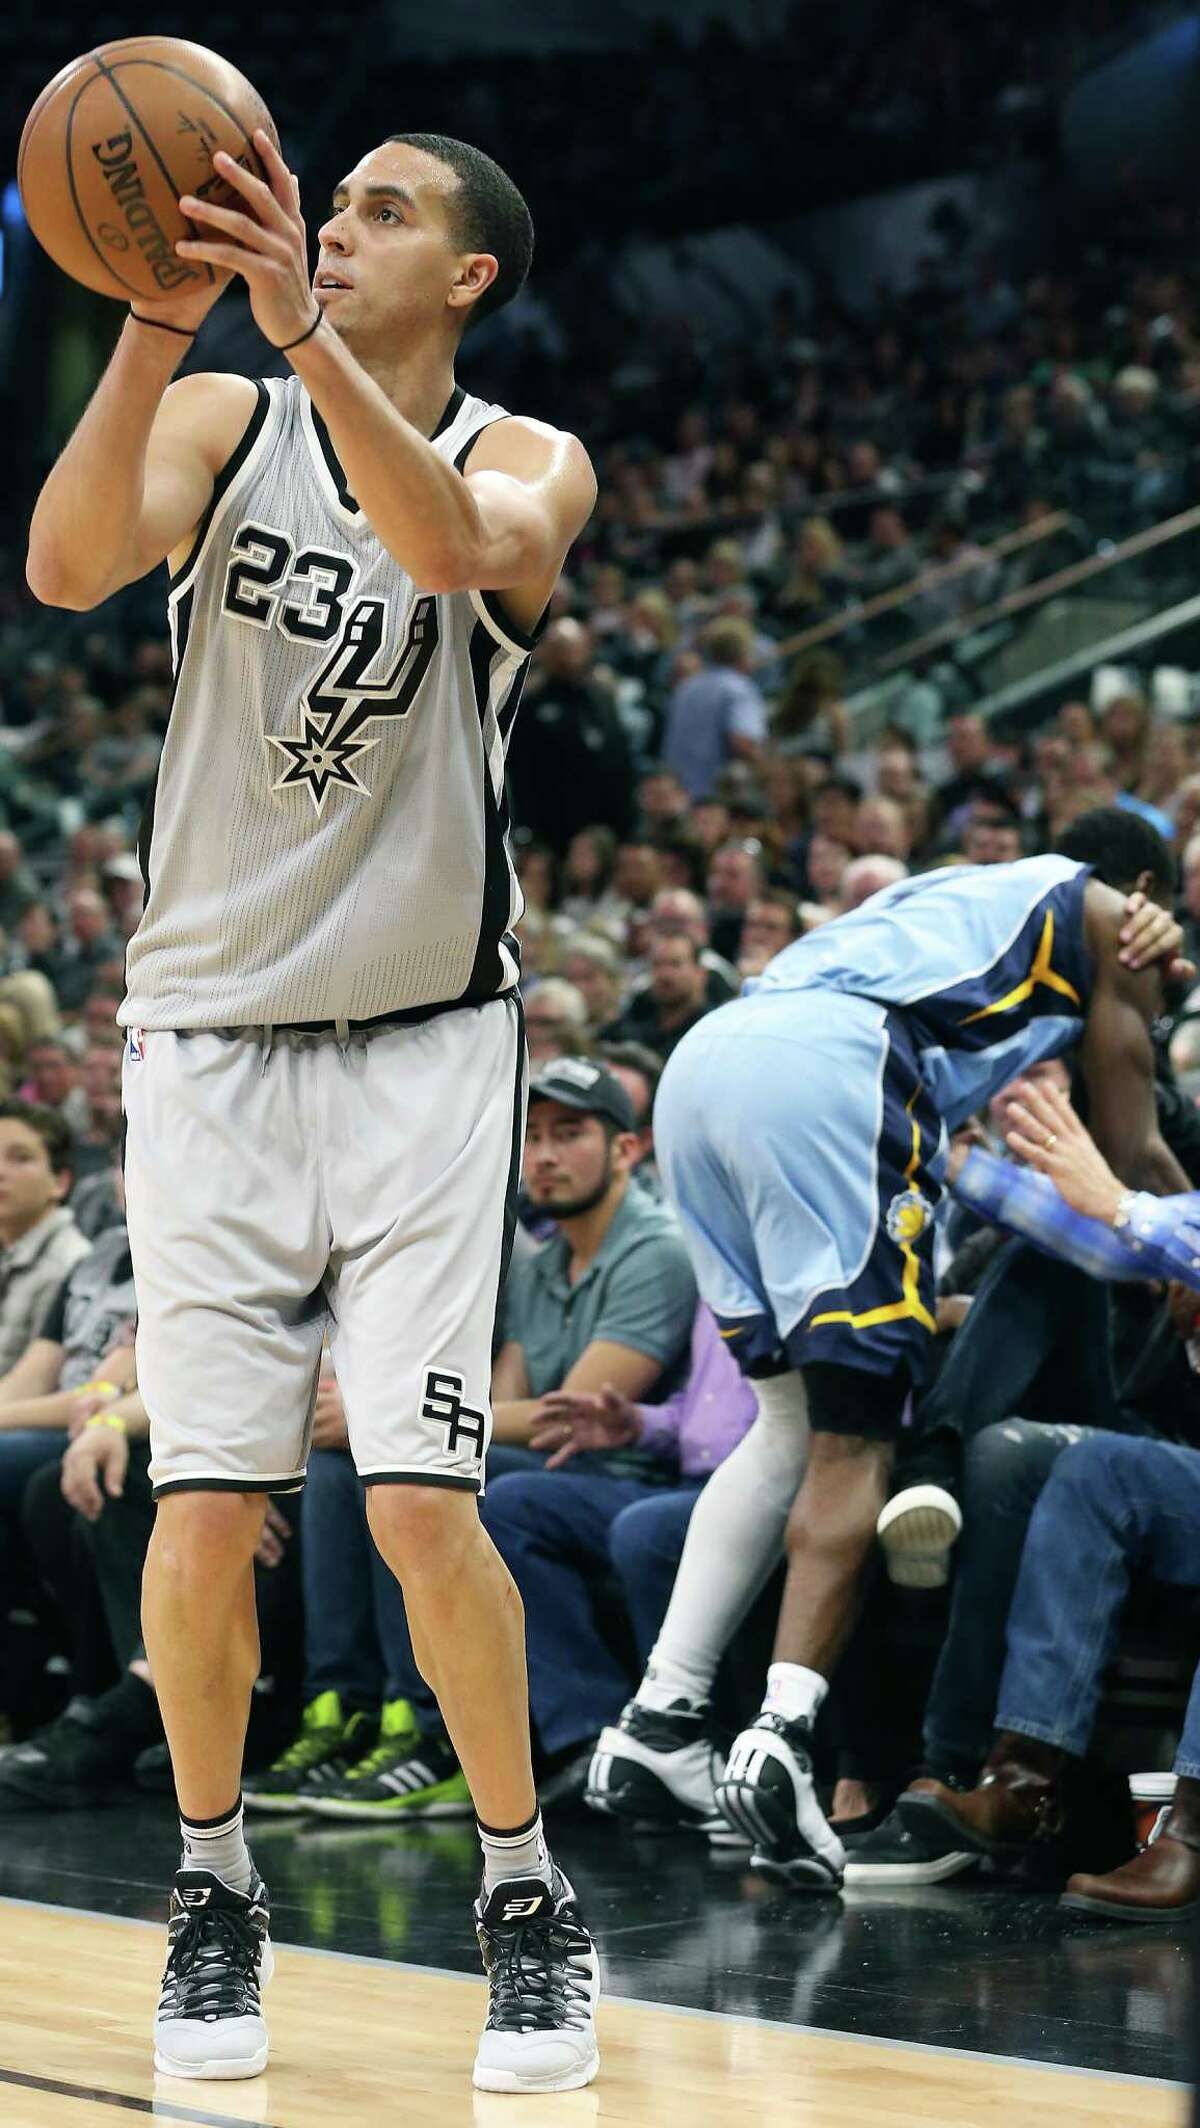 Kevin Martin loses his defender to the audience and takes a shot as the Spurs host the Grizzlies at the AT&T Center on March 25, 2016.